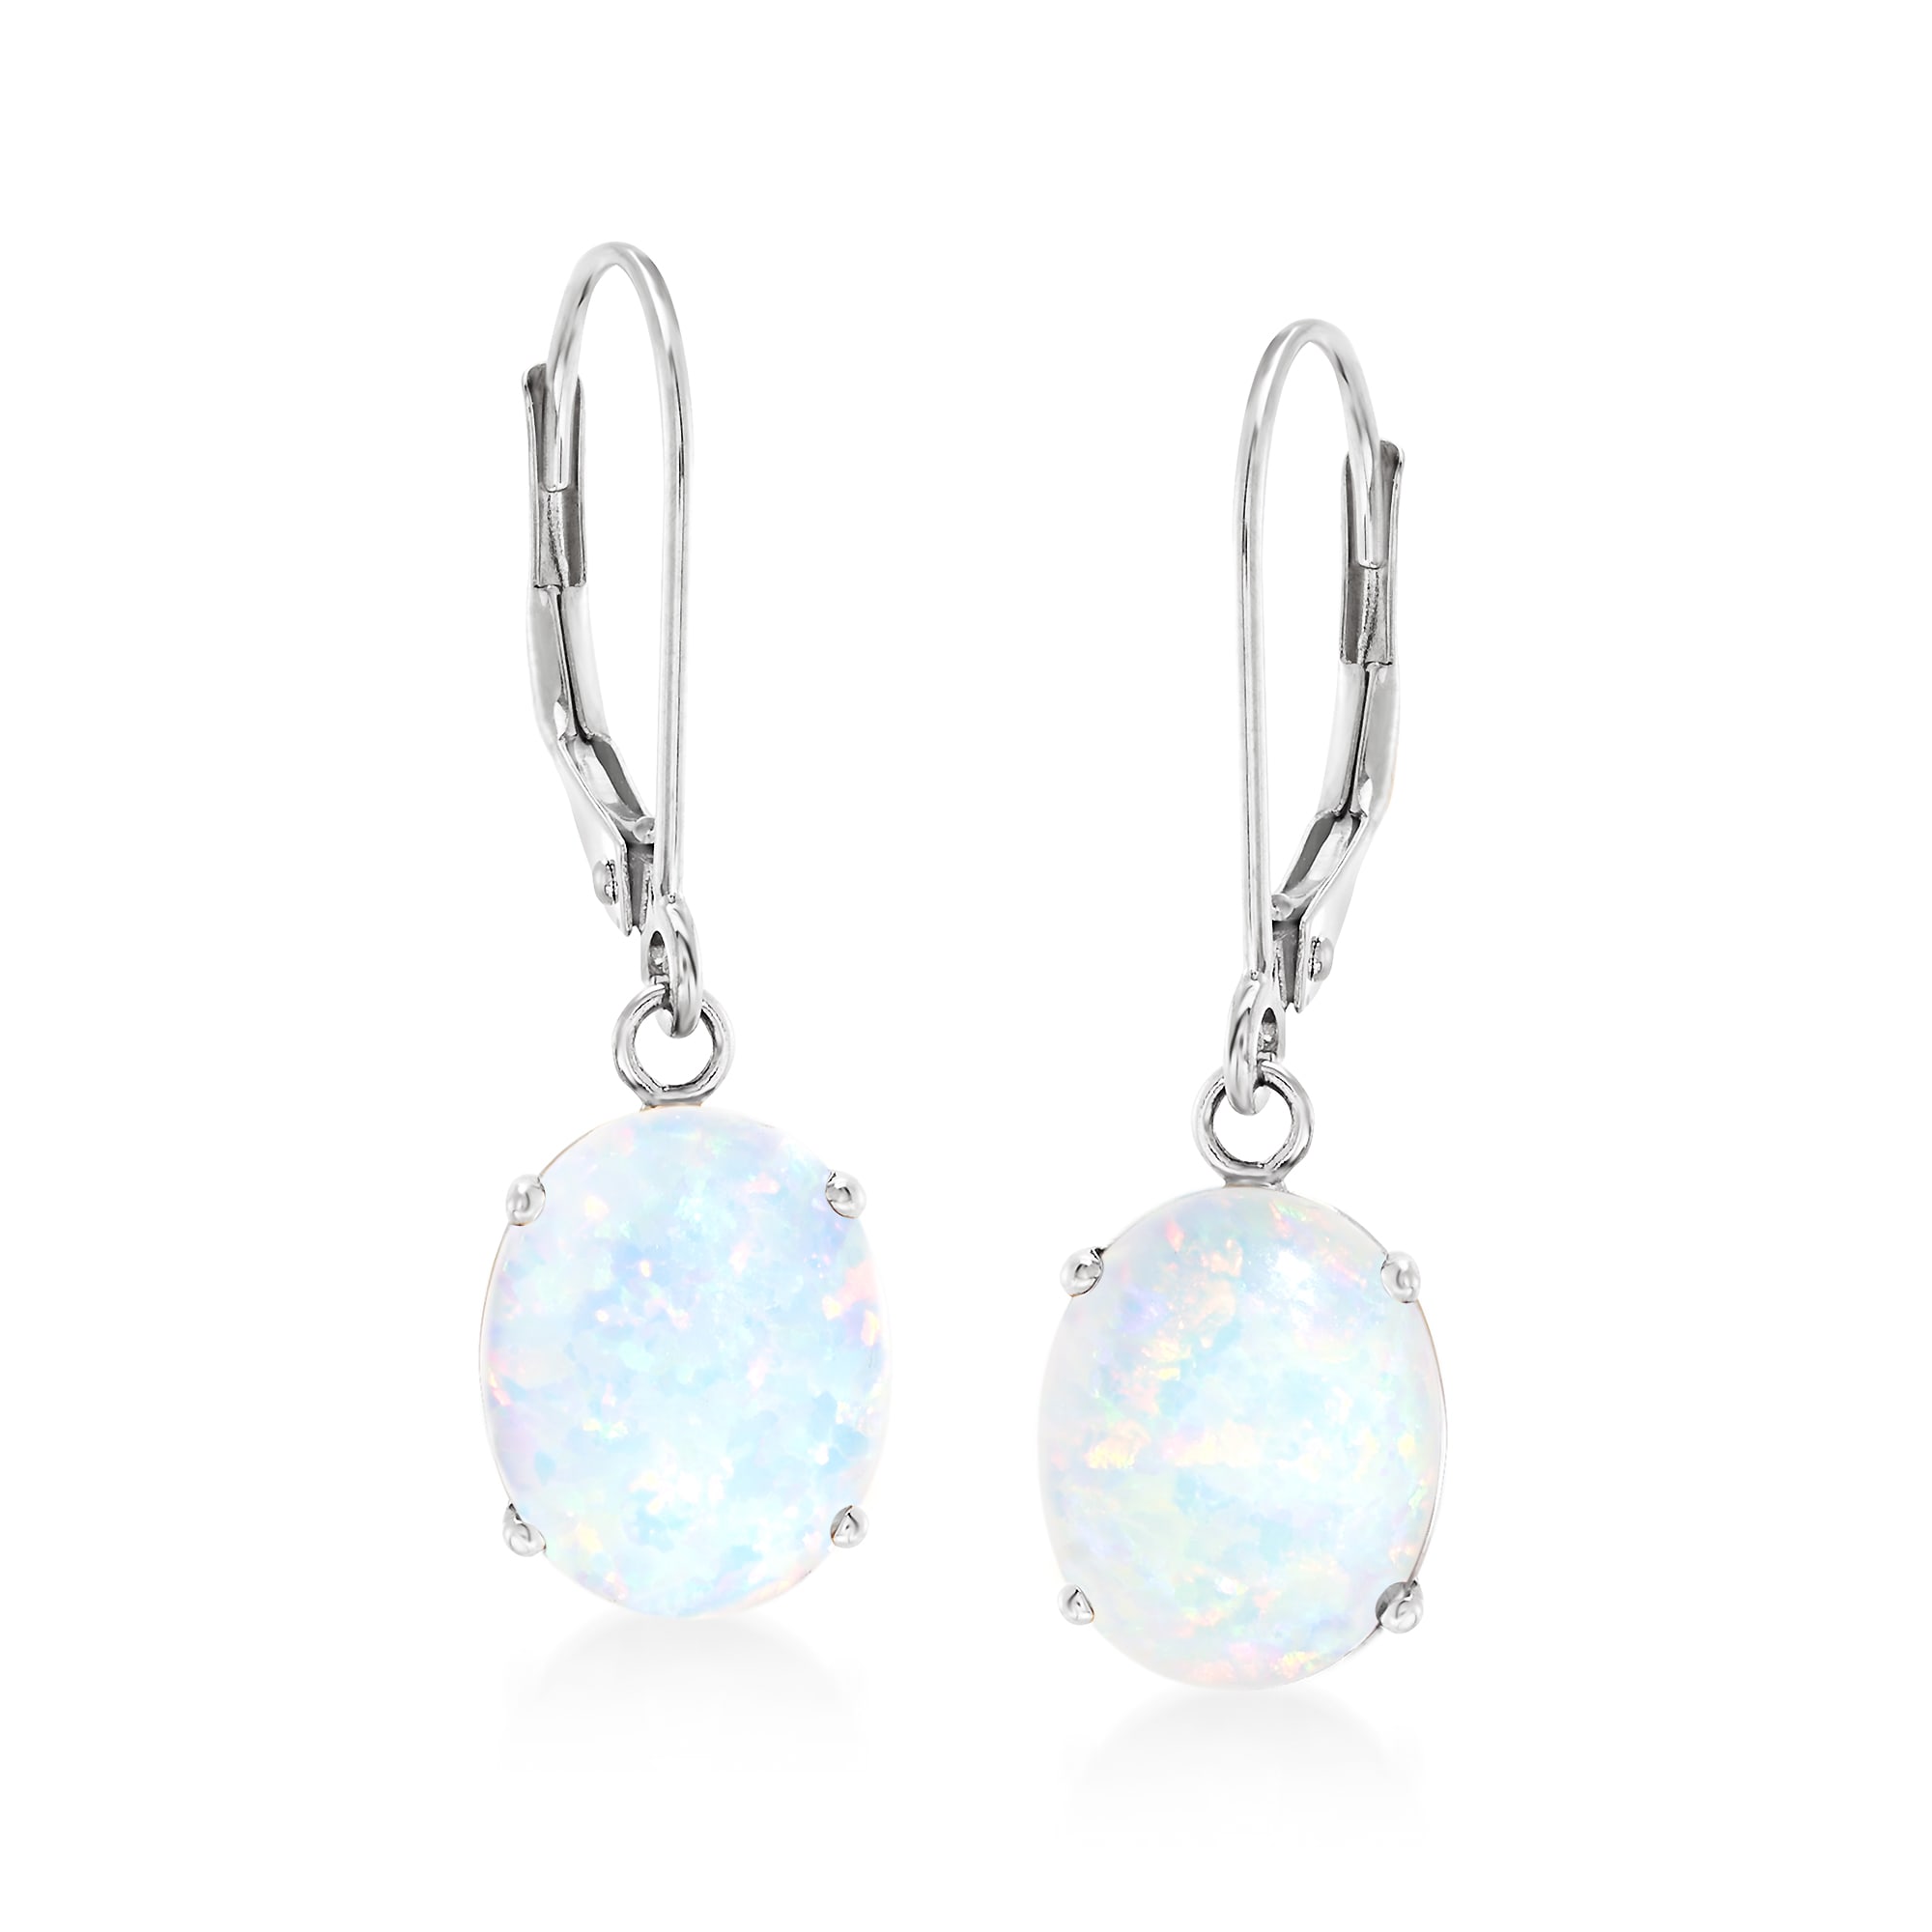 Simulated Opal Drop Earrings in 14kt White Gold | Ross-Simons